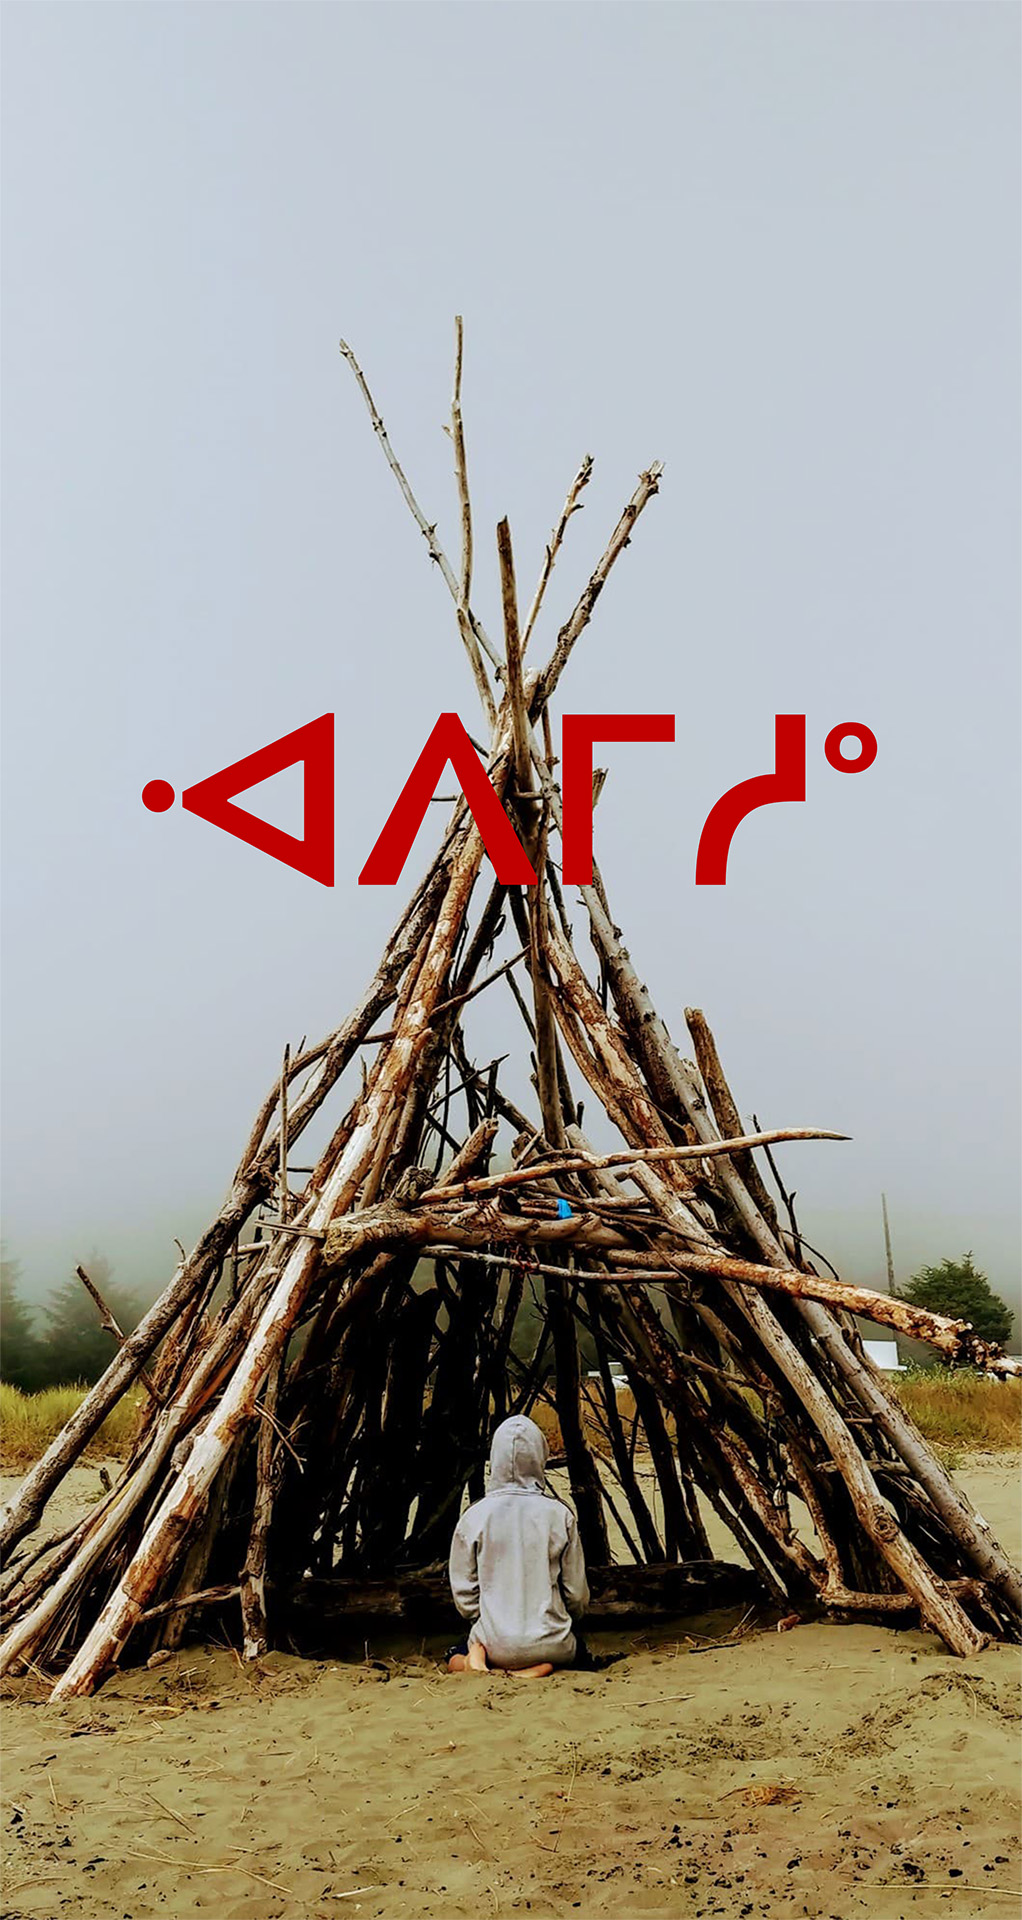 A person with their back to the camera sits in a wooden tipi on sand. Cree syllabics are overlayed